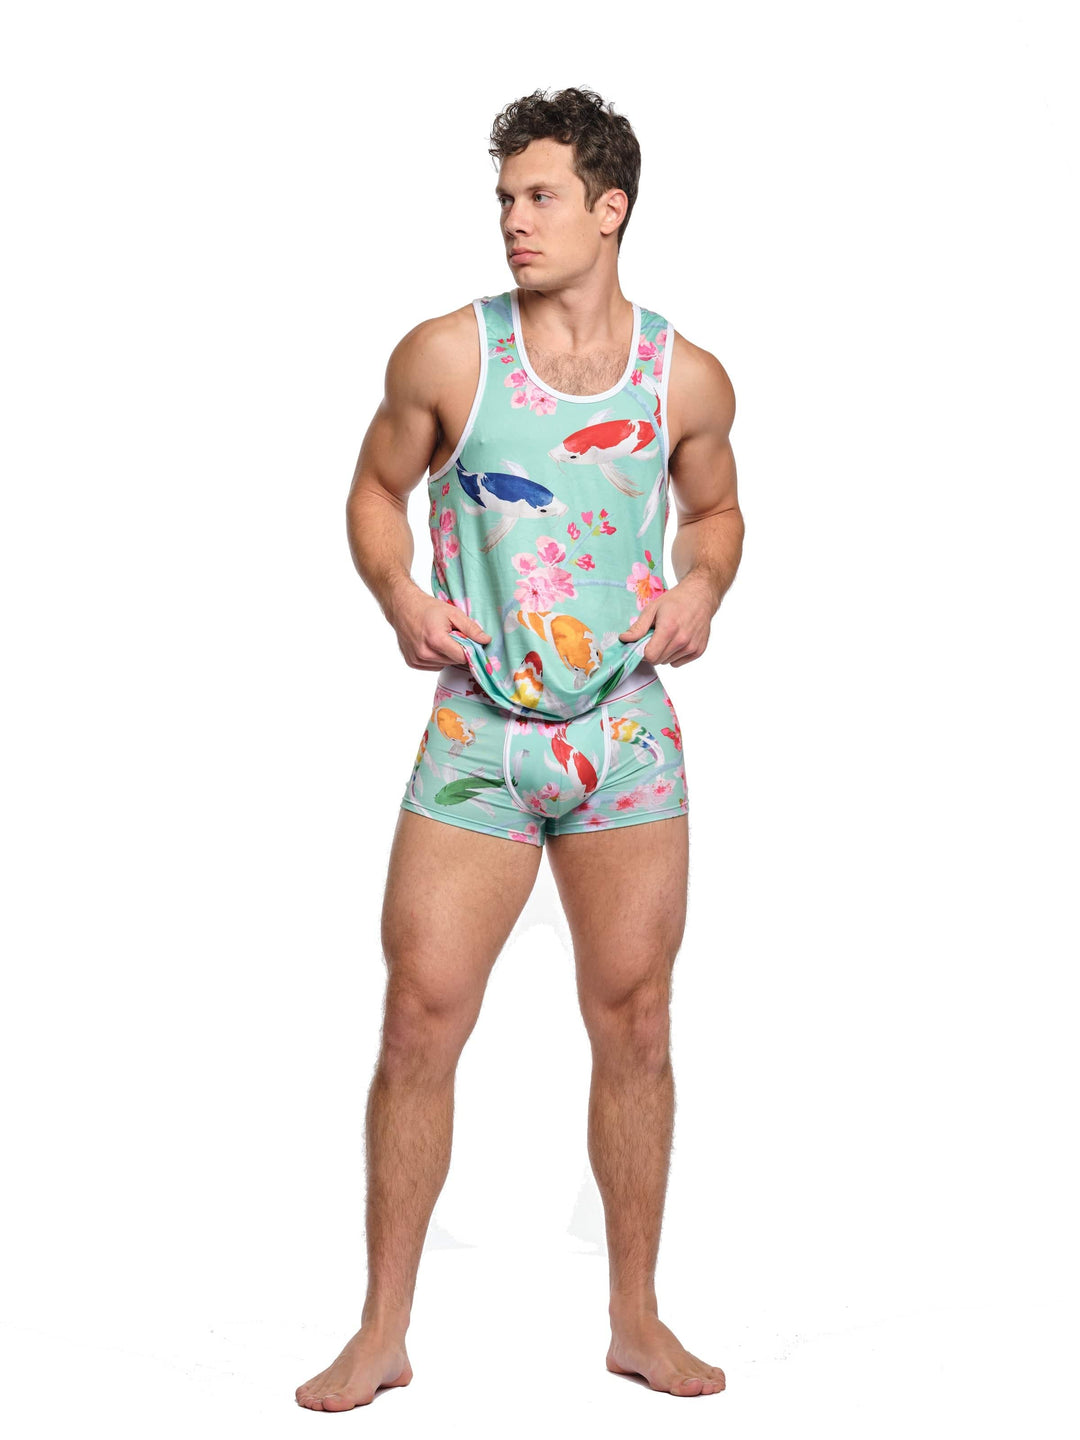  Skull and Bones Classic Fashion Trunk Underwear Blue Flamingo  Print- SB02 (Blue Flamingo Print, S) : Clothing, Shoes & Jewelry